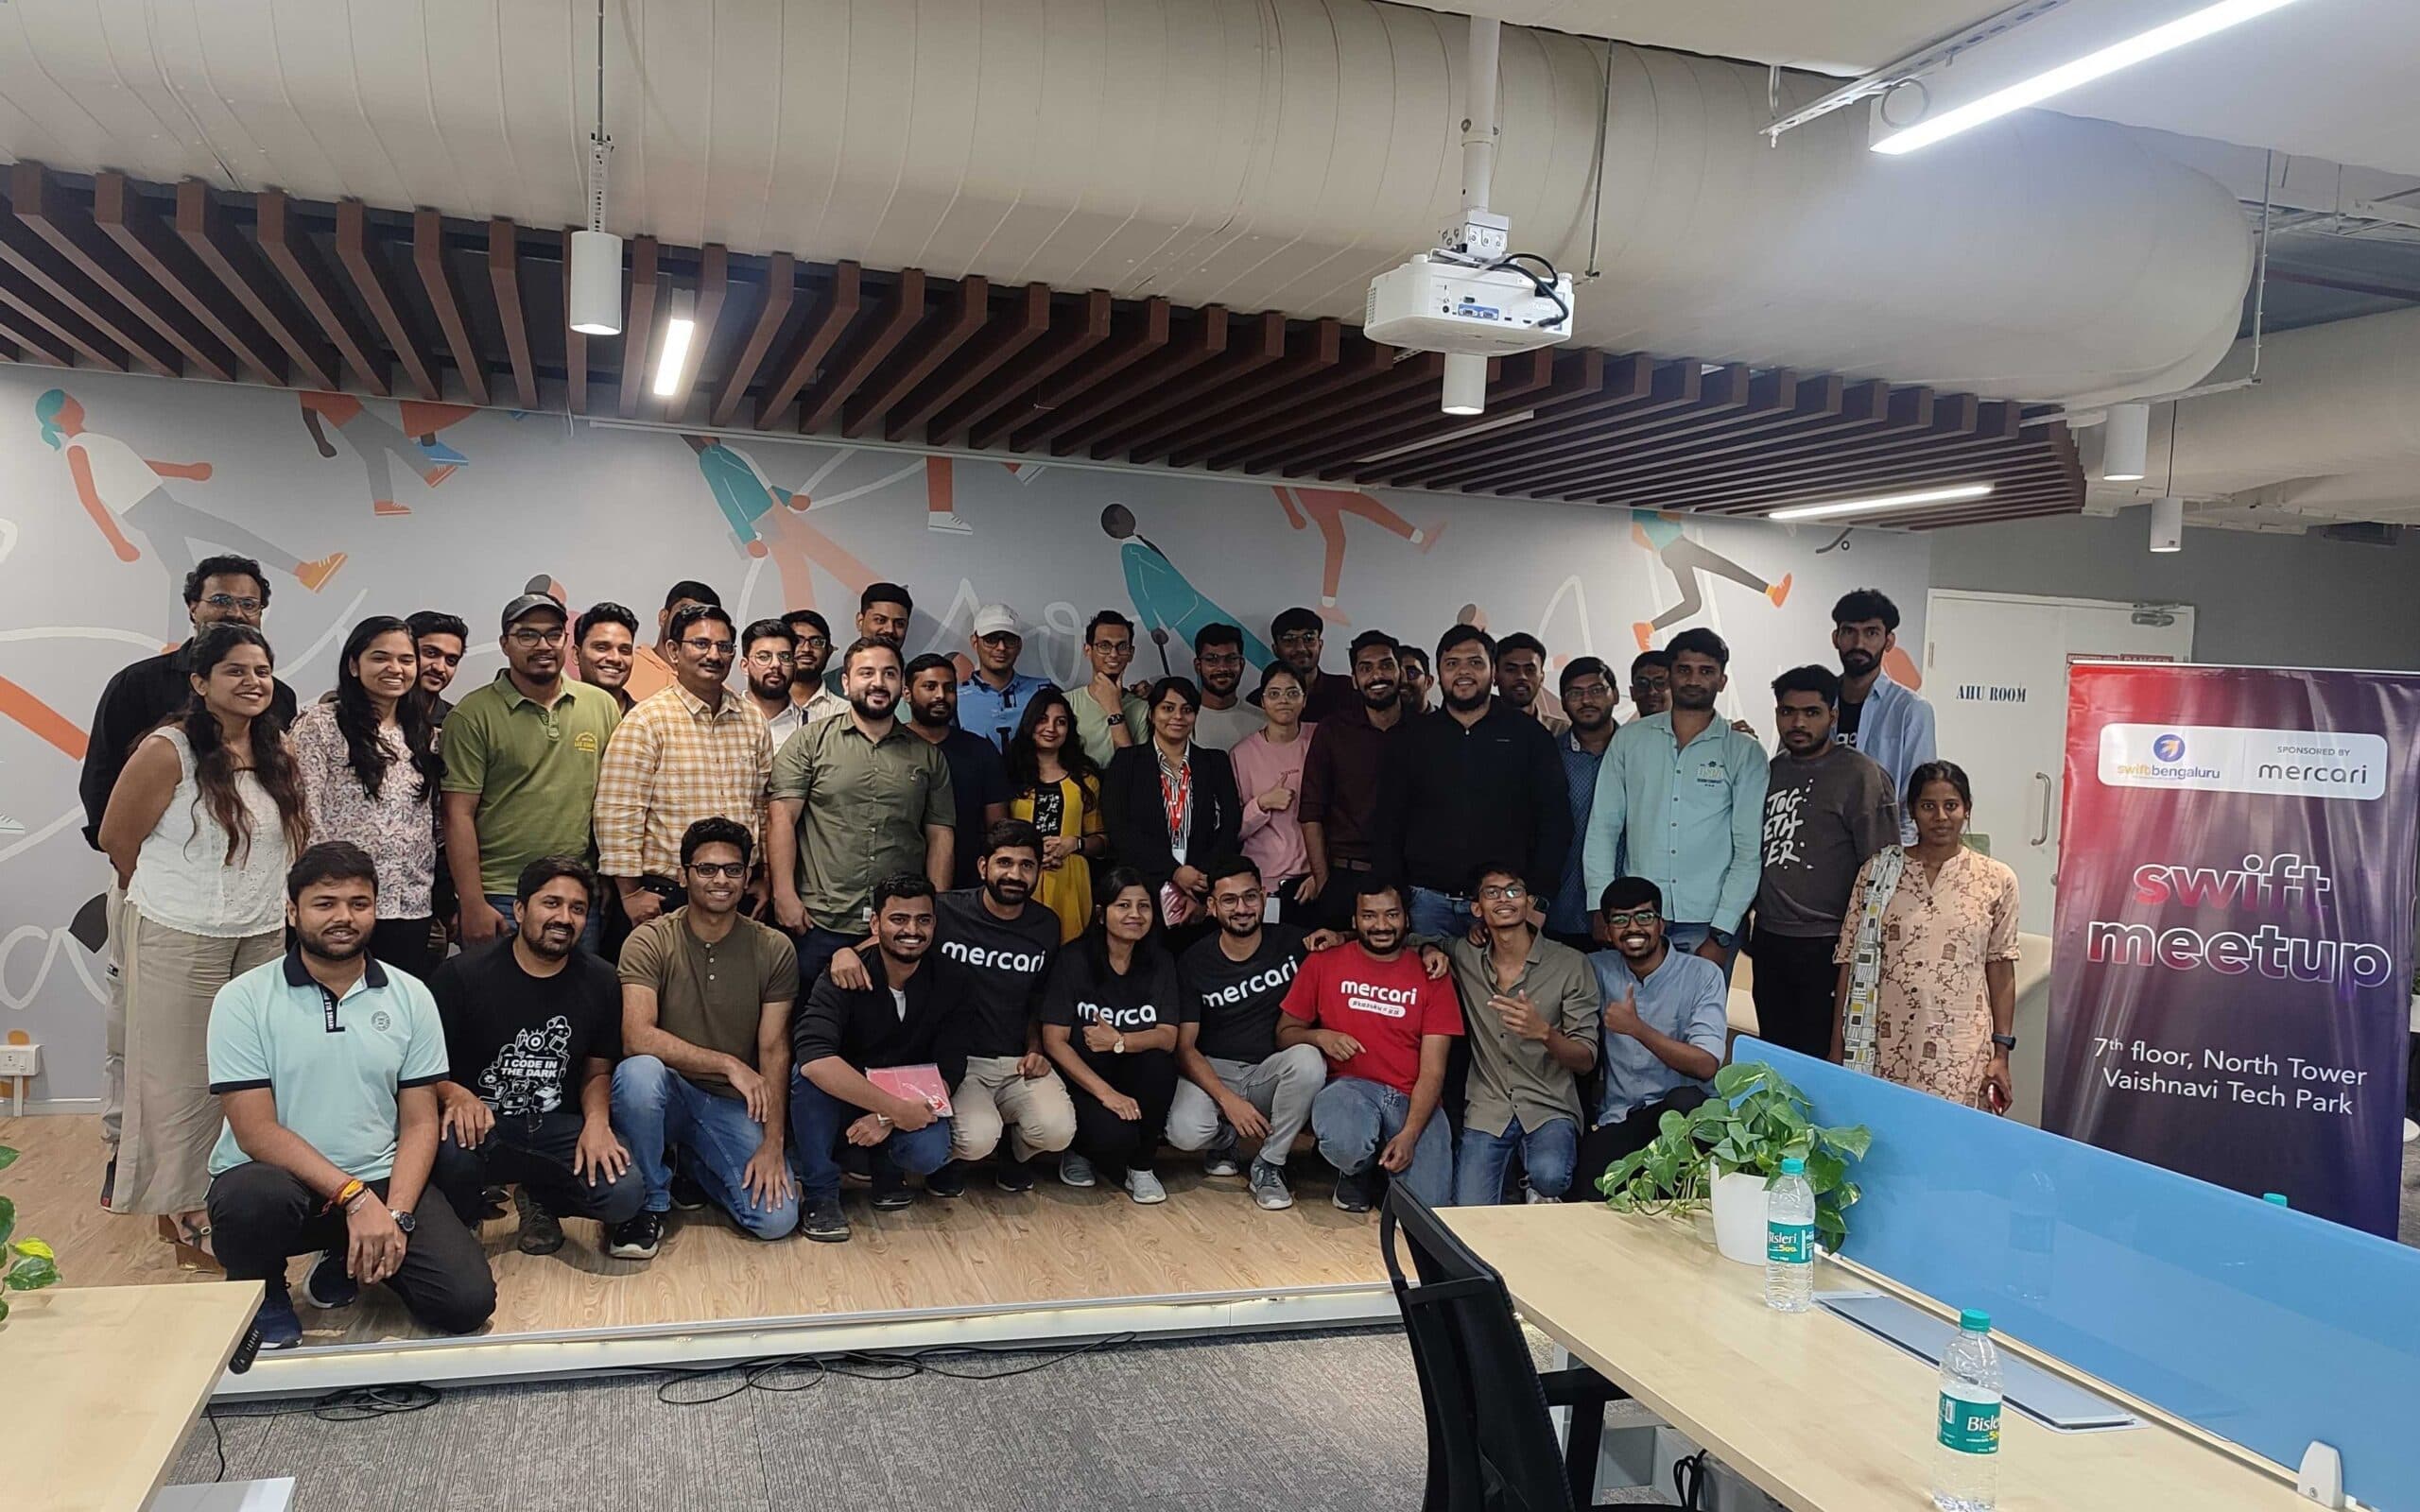 swift-innovations-unleashed-a-look-inside-the-mercari-india-meetup